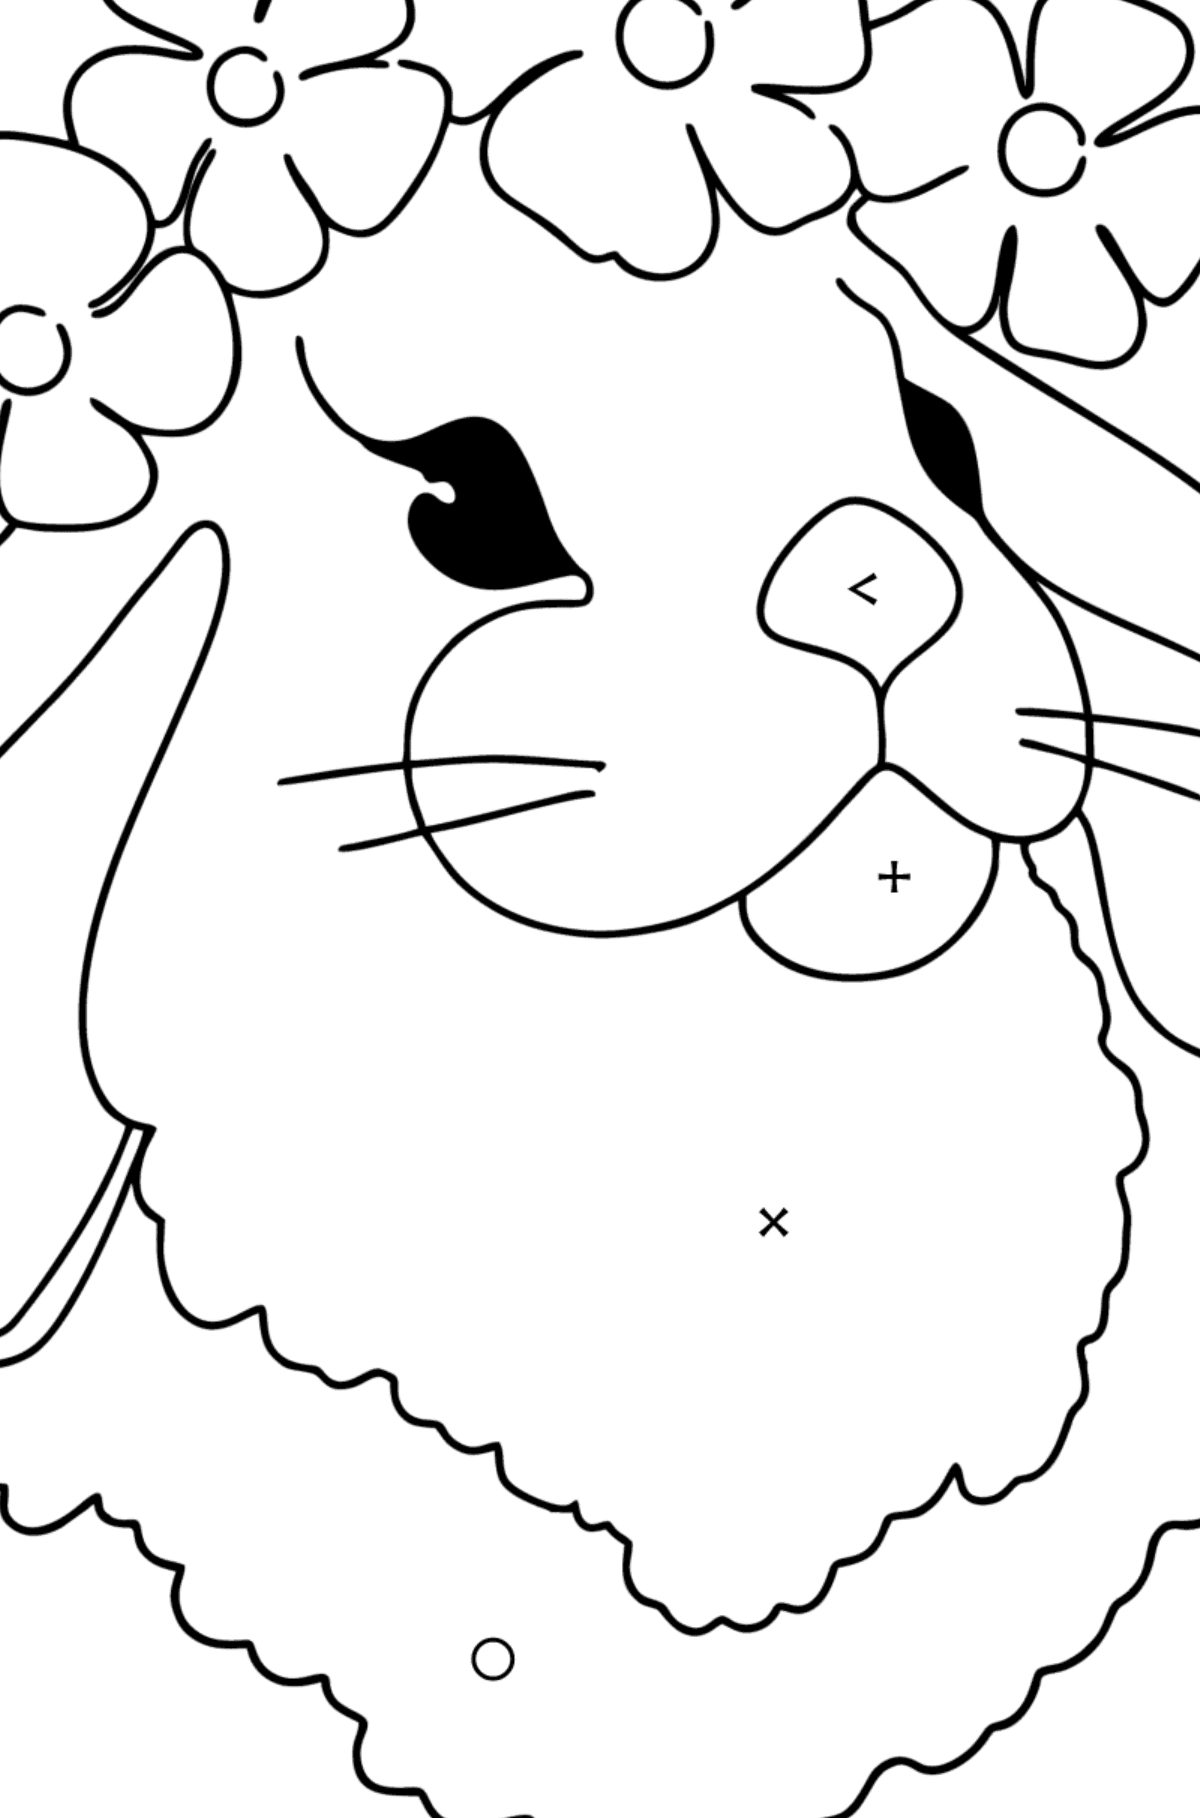 Hare Face coloring page - Coloring by Symbols and Geometric Shapes for Kids